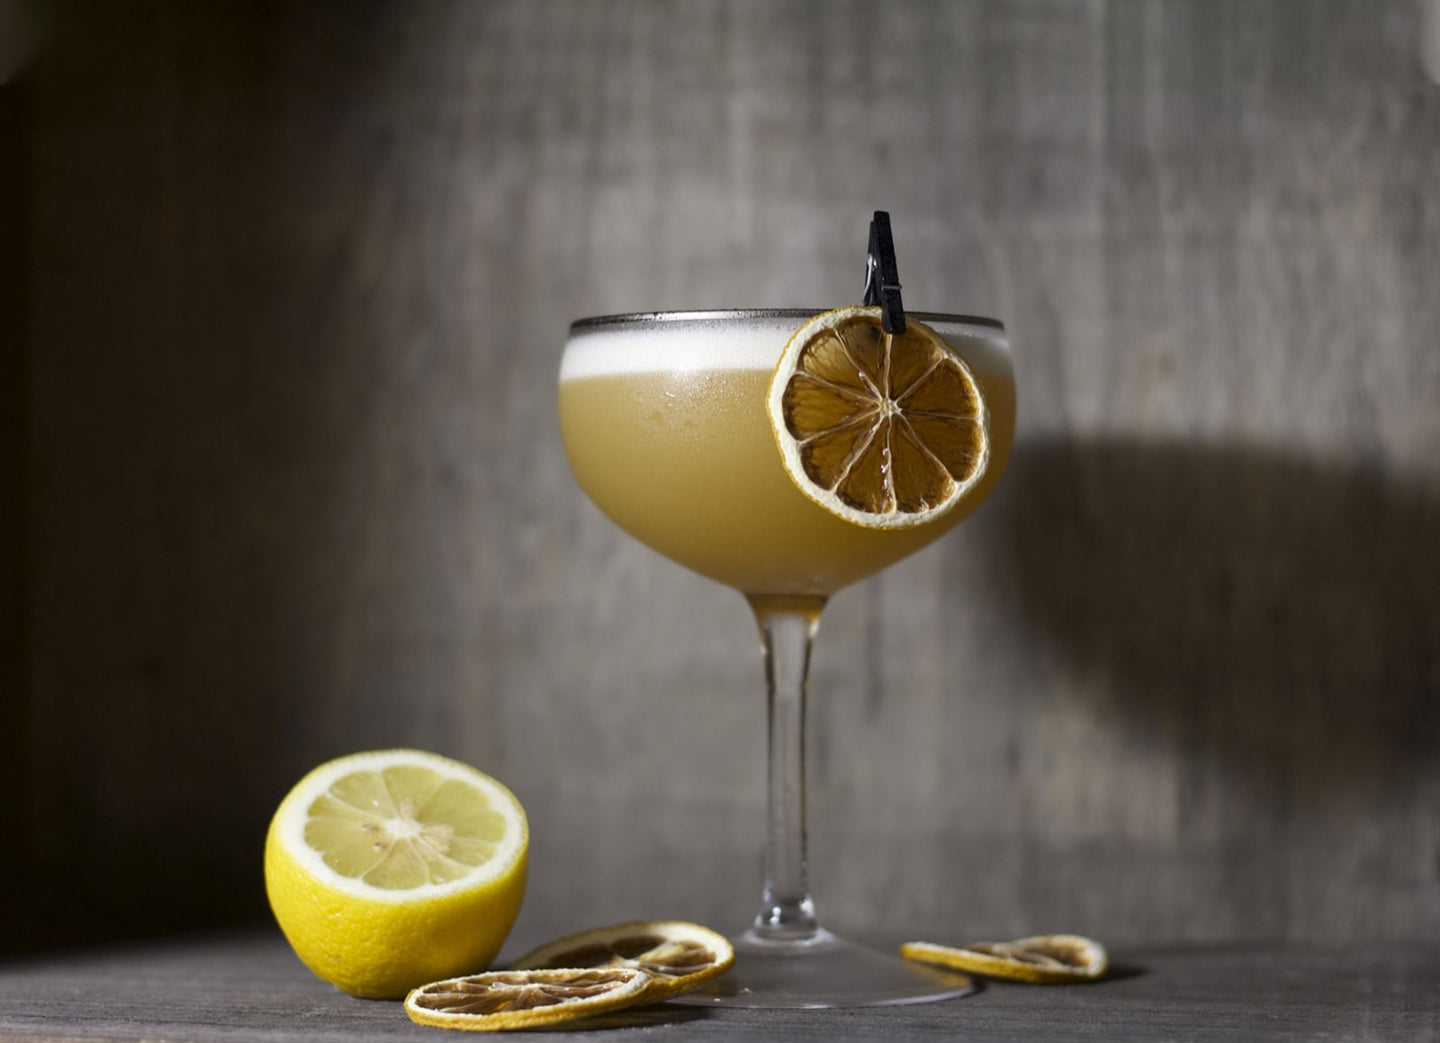 A Cocktail Without A Garnish Just Isn't Complete